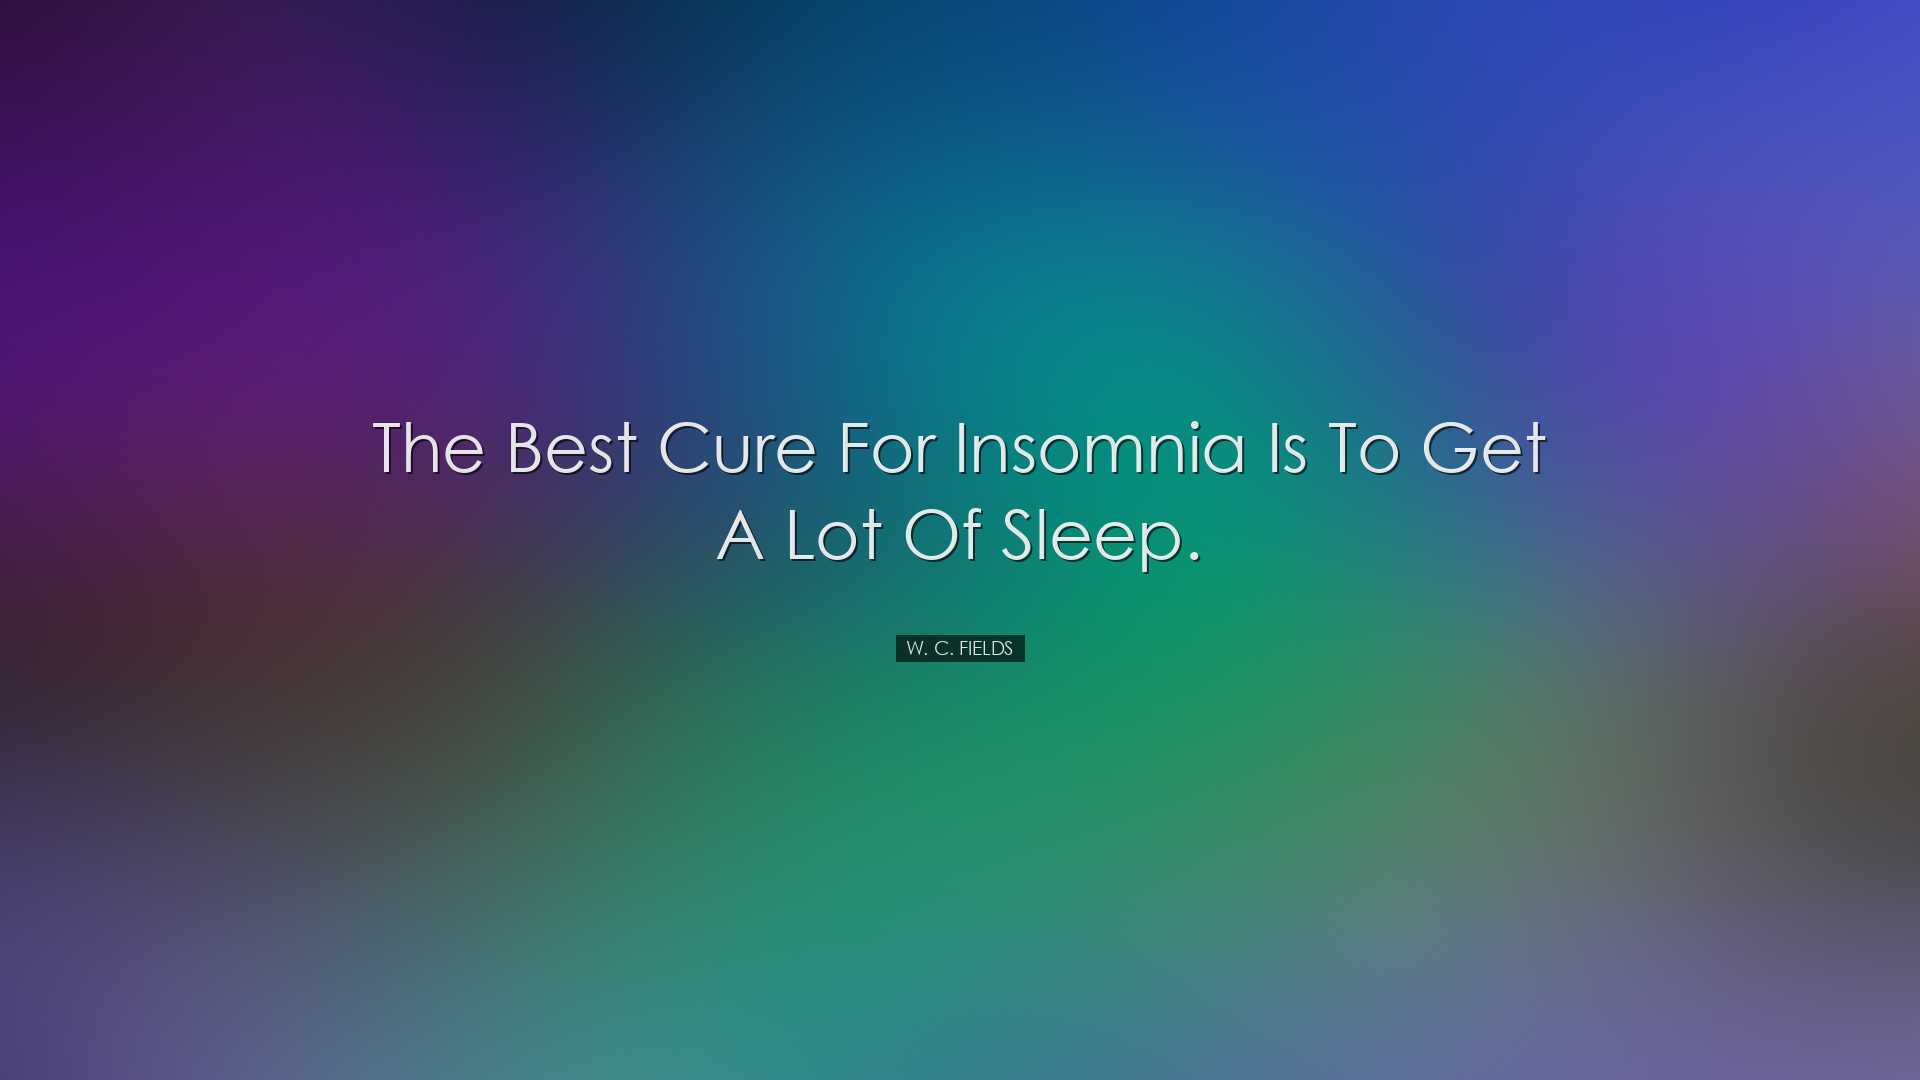 The best cure for insomnia is to get a lot of sleep. - W. C. Field